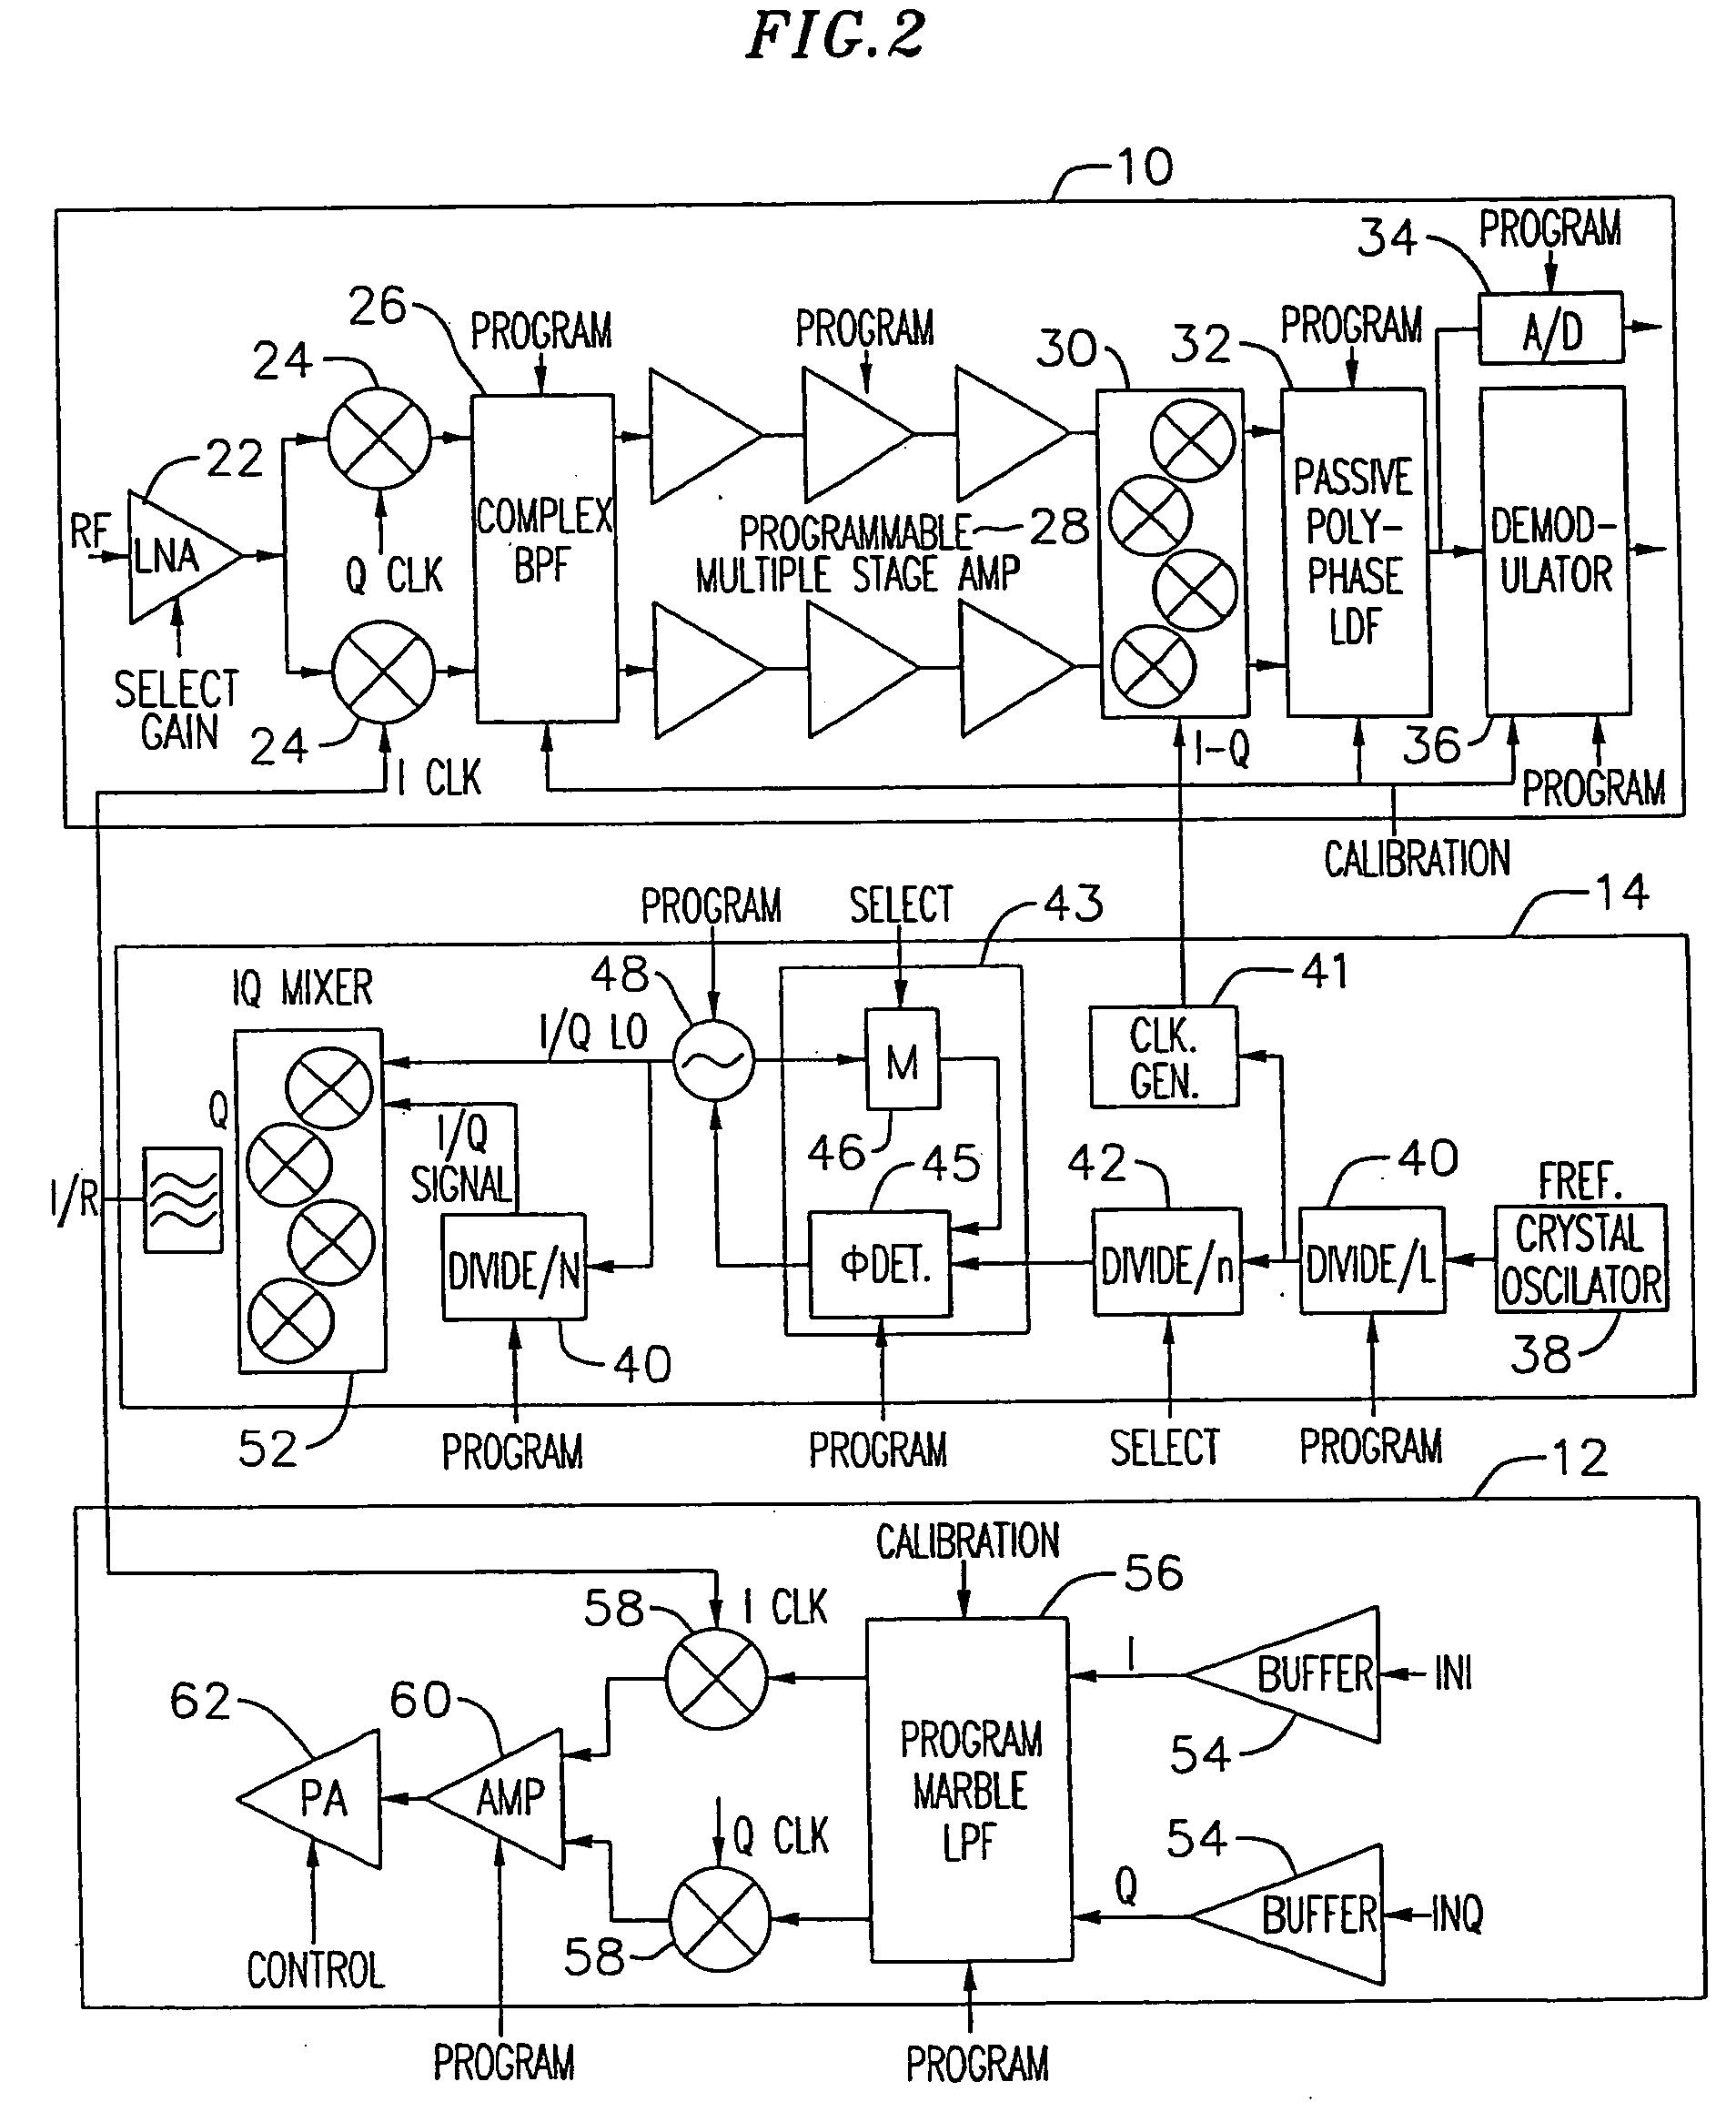 Adaptive radio transceiver with noise suppression